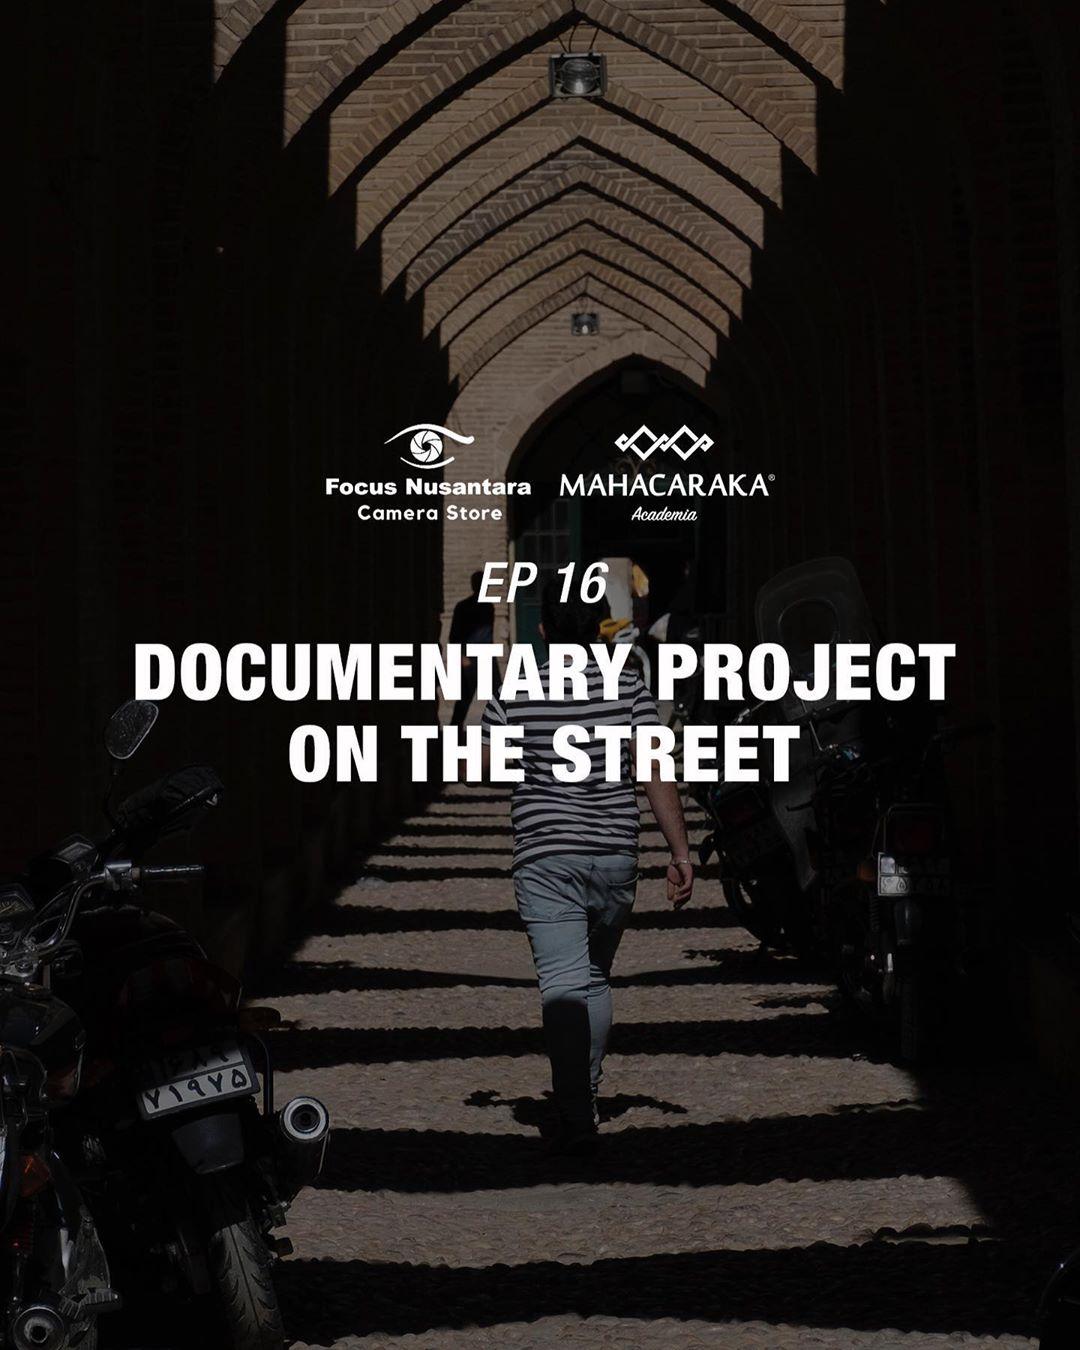 DOCUMENTARY PROJECT ON THE STREET